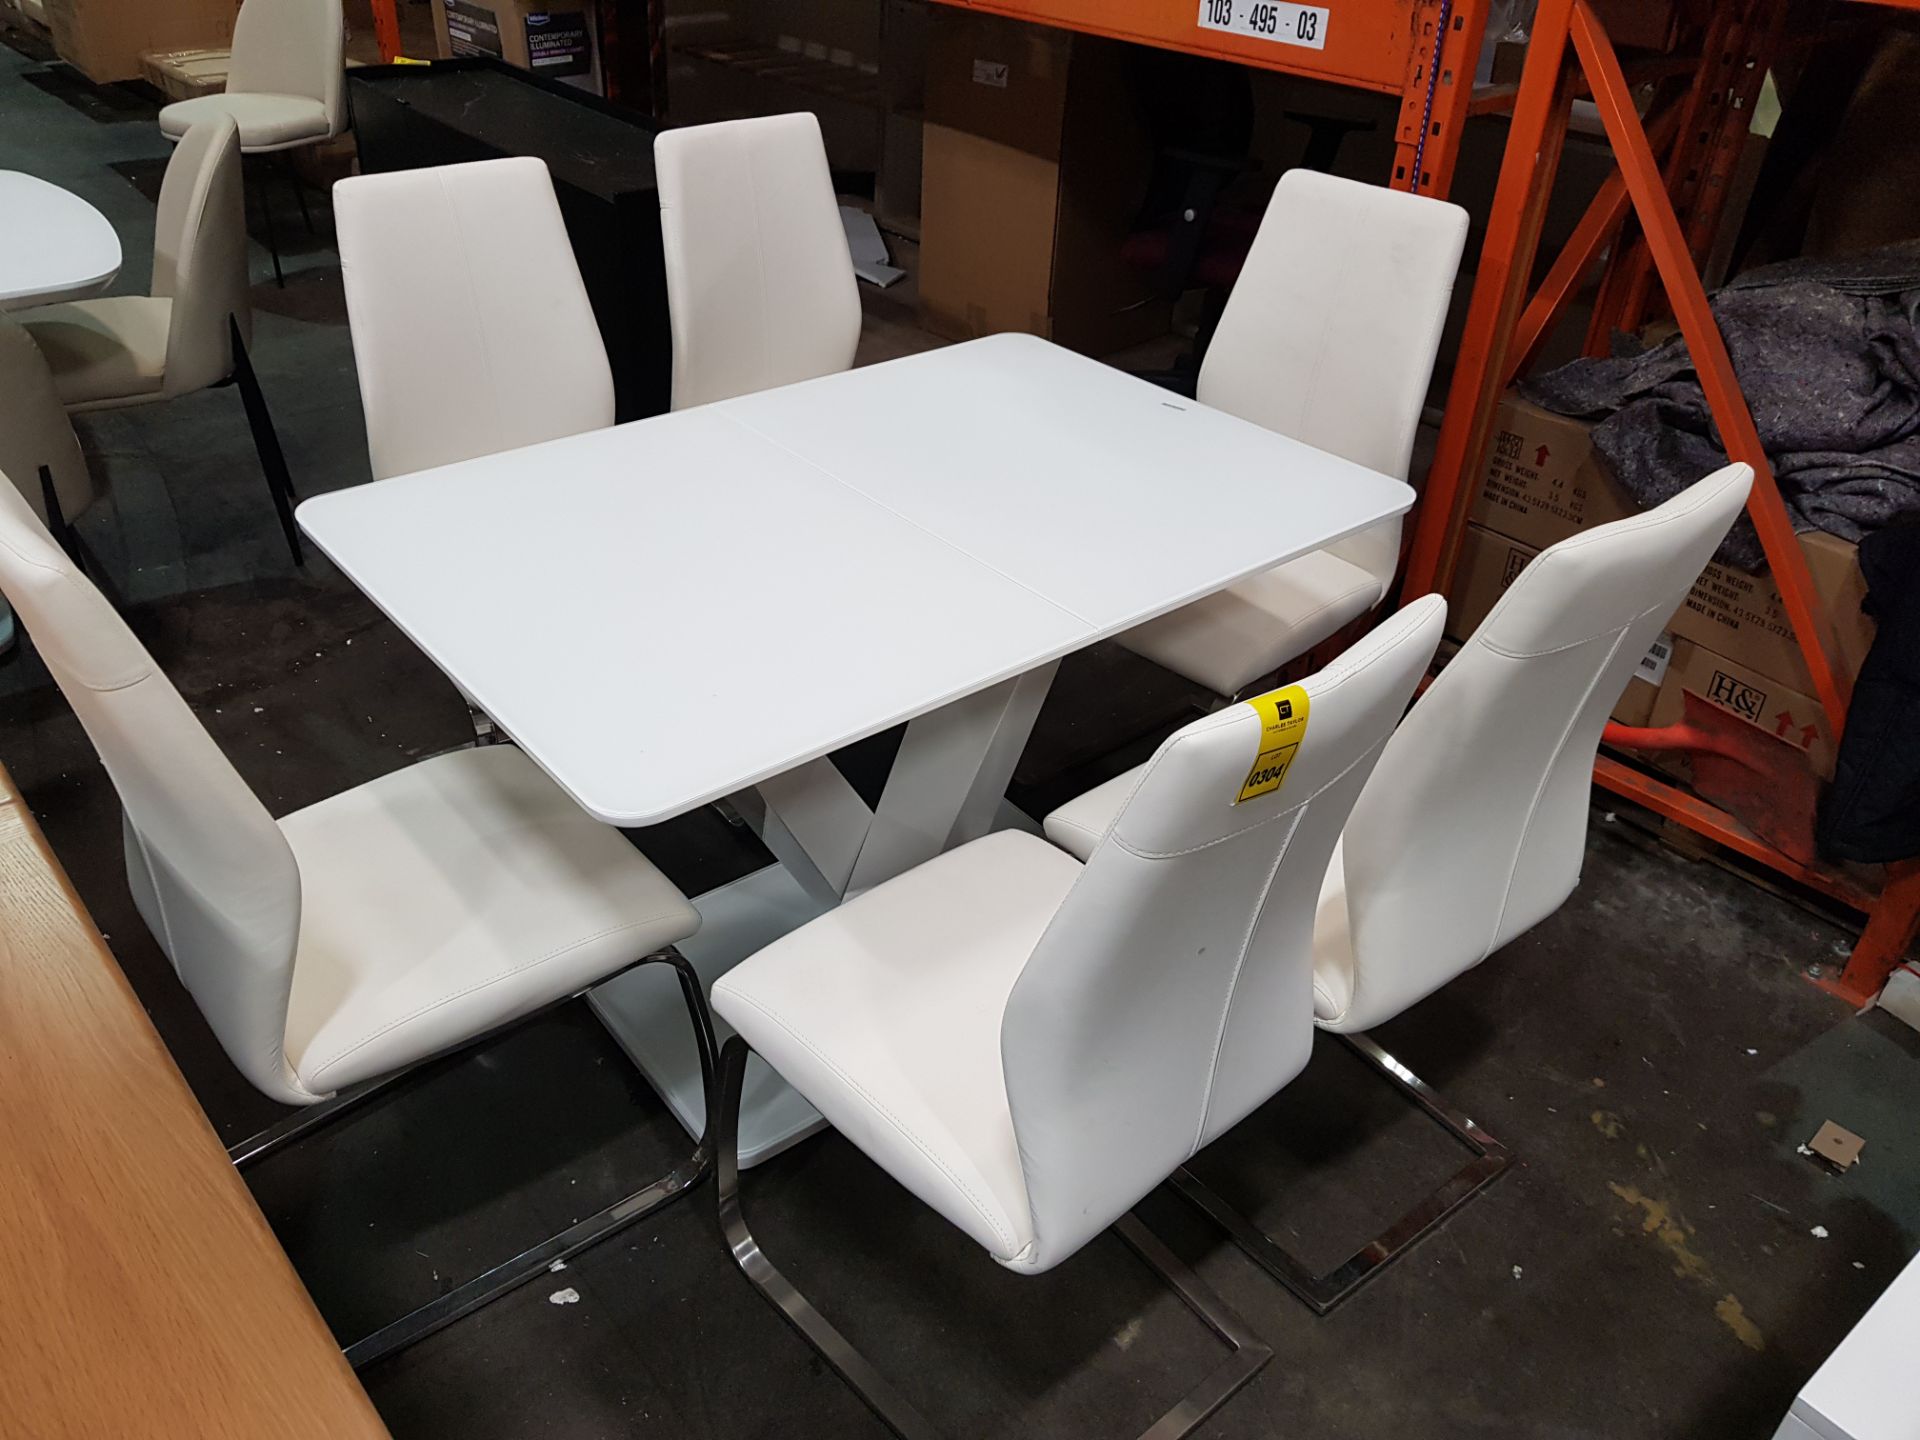 1 X RAFAEL DINING TABLE IN WHITE EXTENDING 1200/1600 X 800mm WITH 6 X LEATHER WHITE DINING CHAIRS (